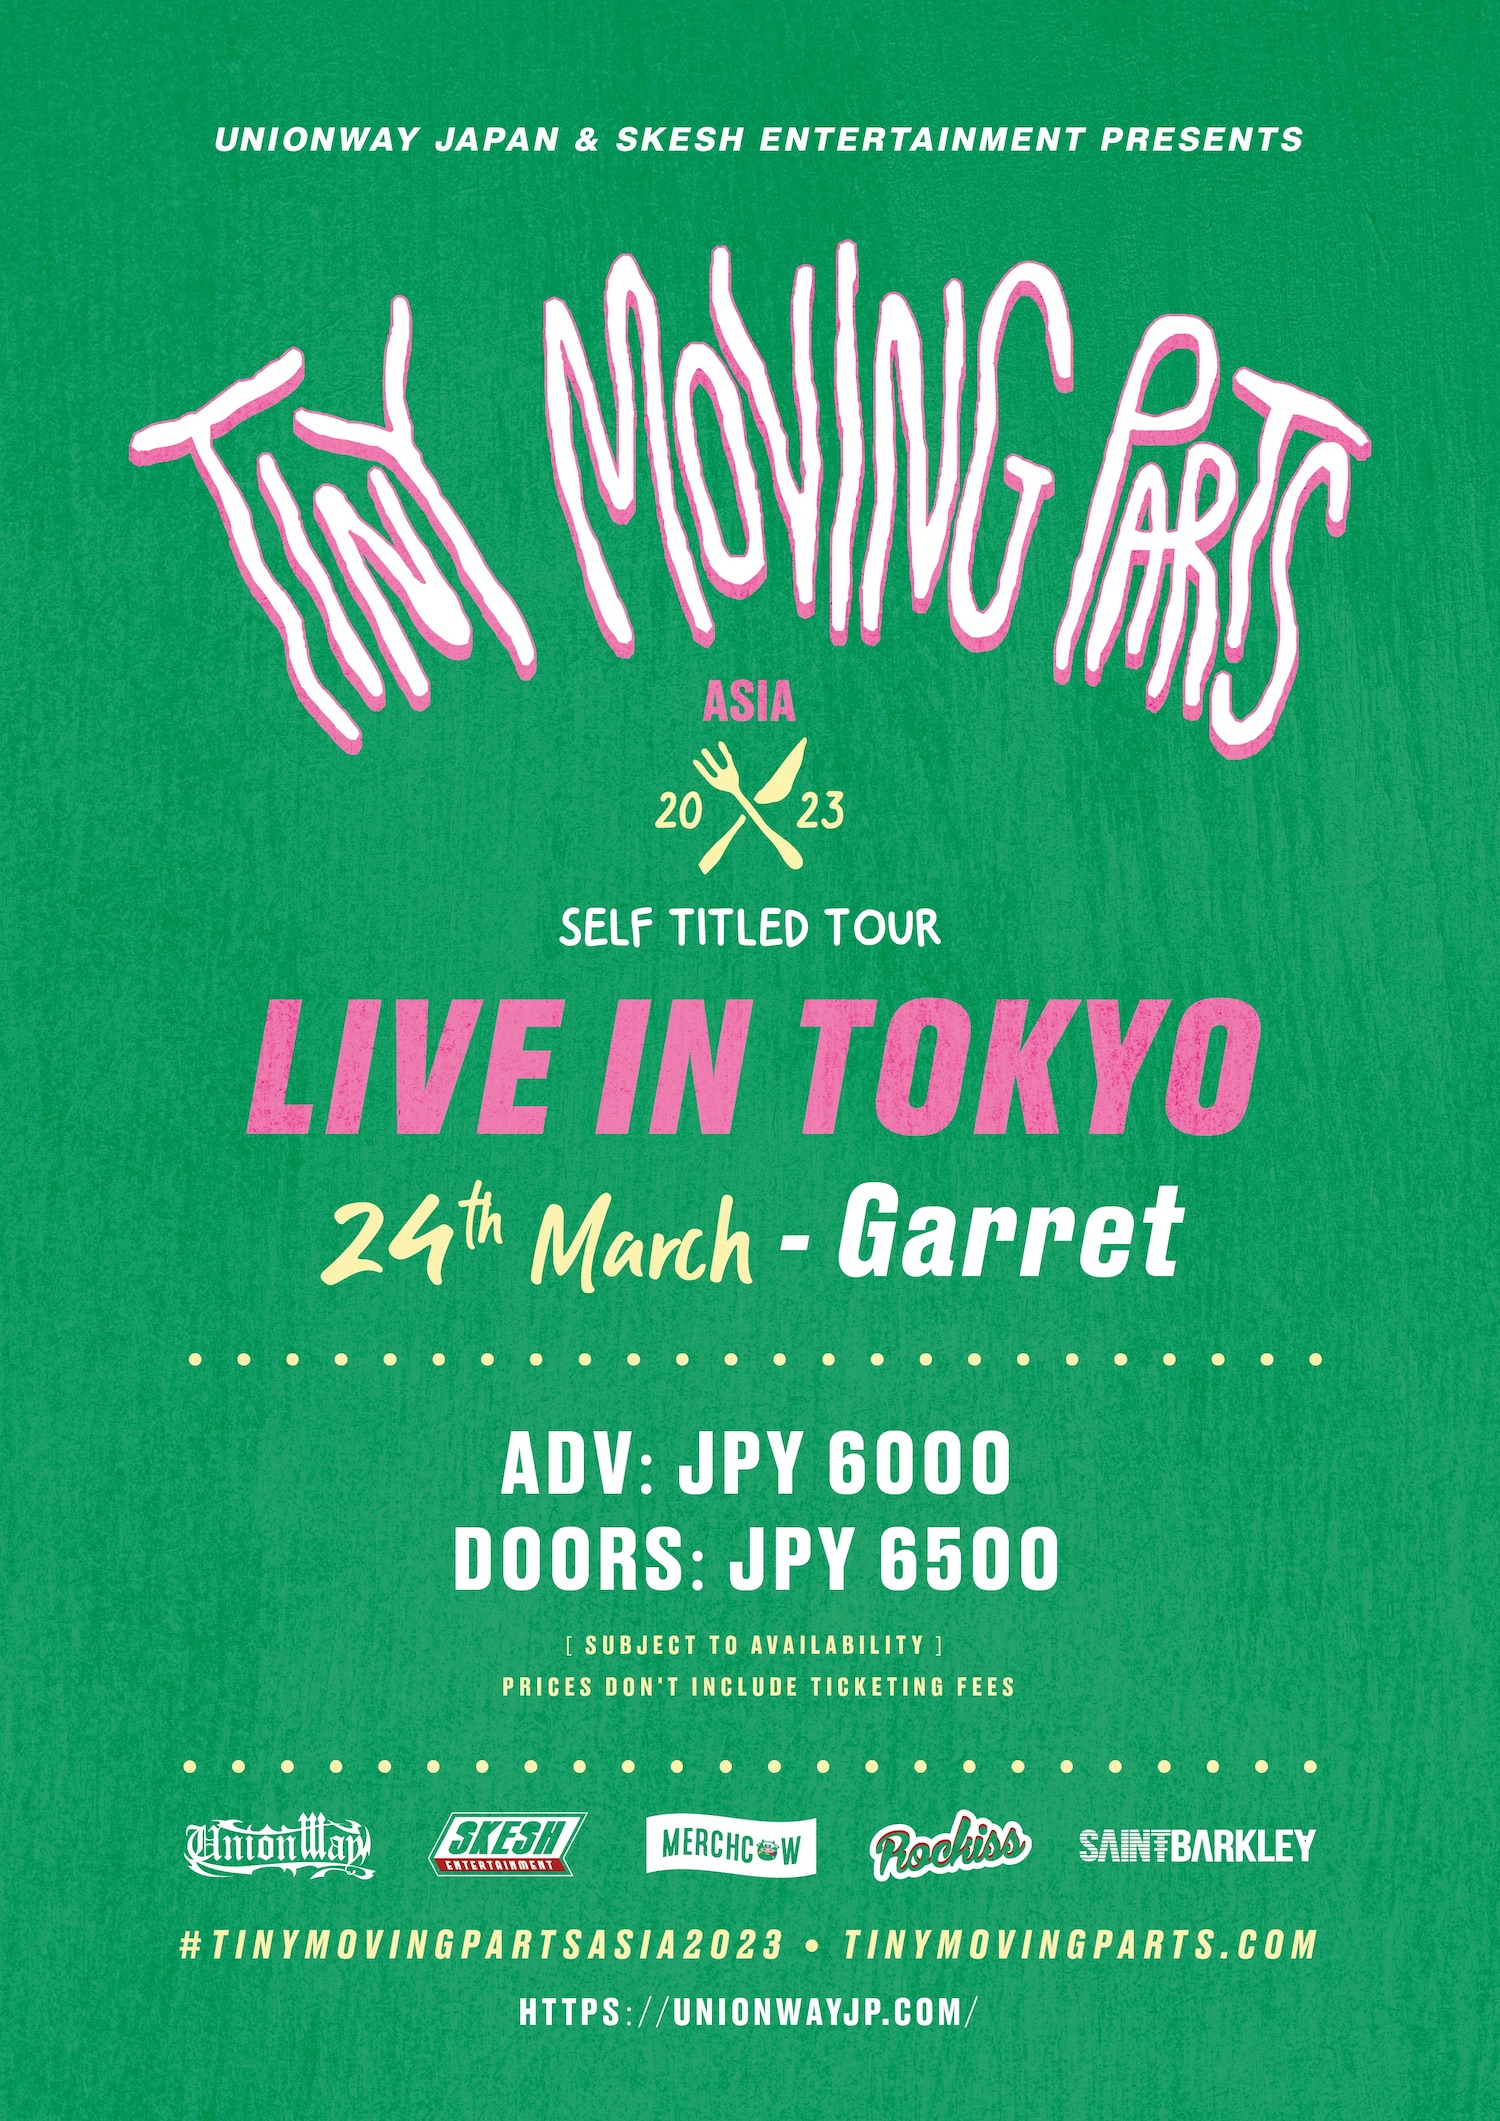 TINY MOVING PARTS 「SELF TITLED ASIA TOUR 2023」